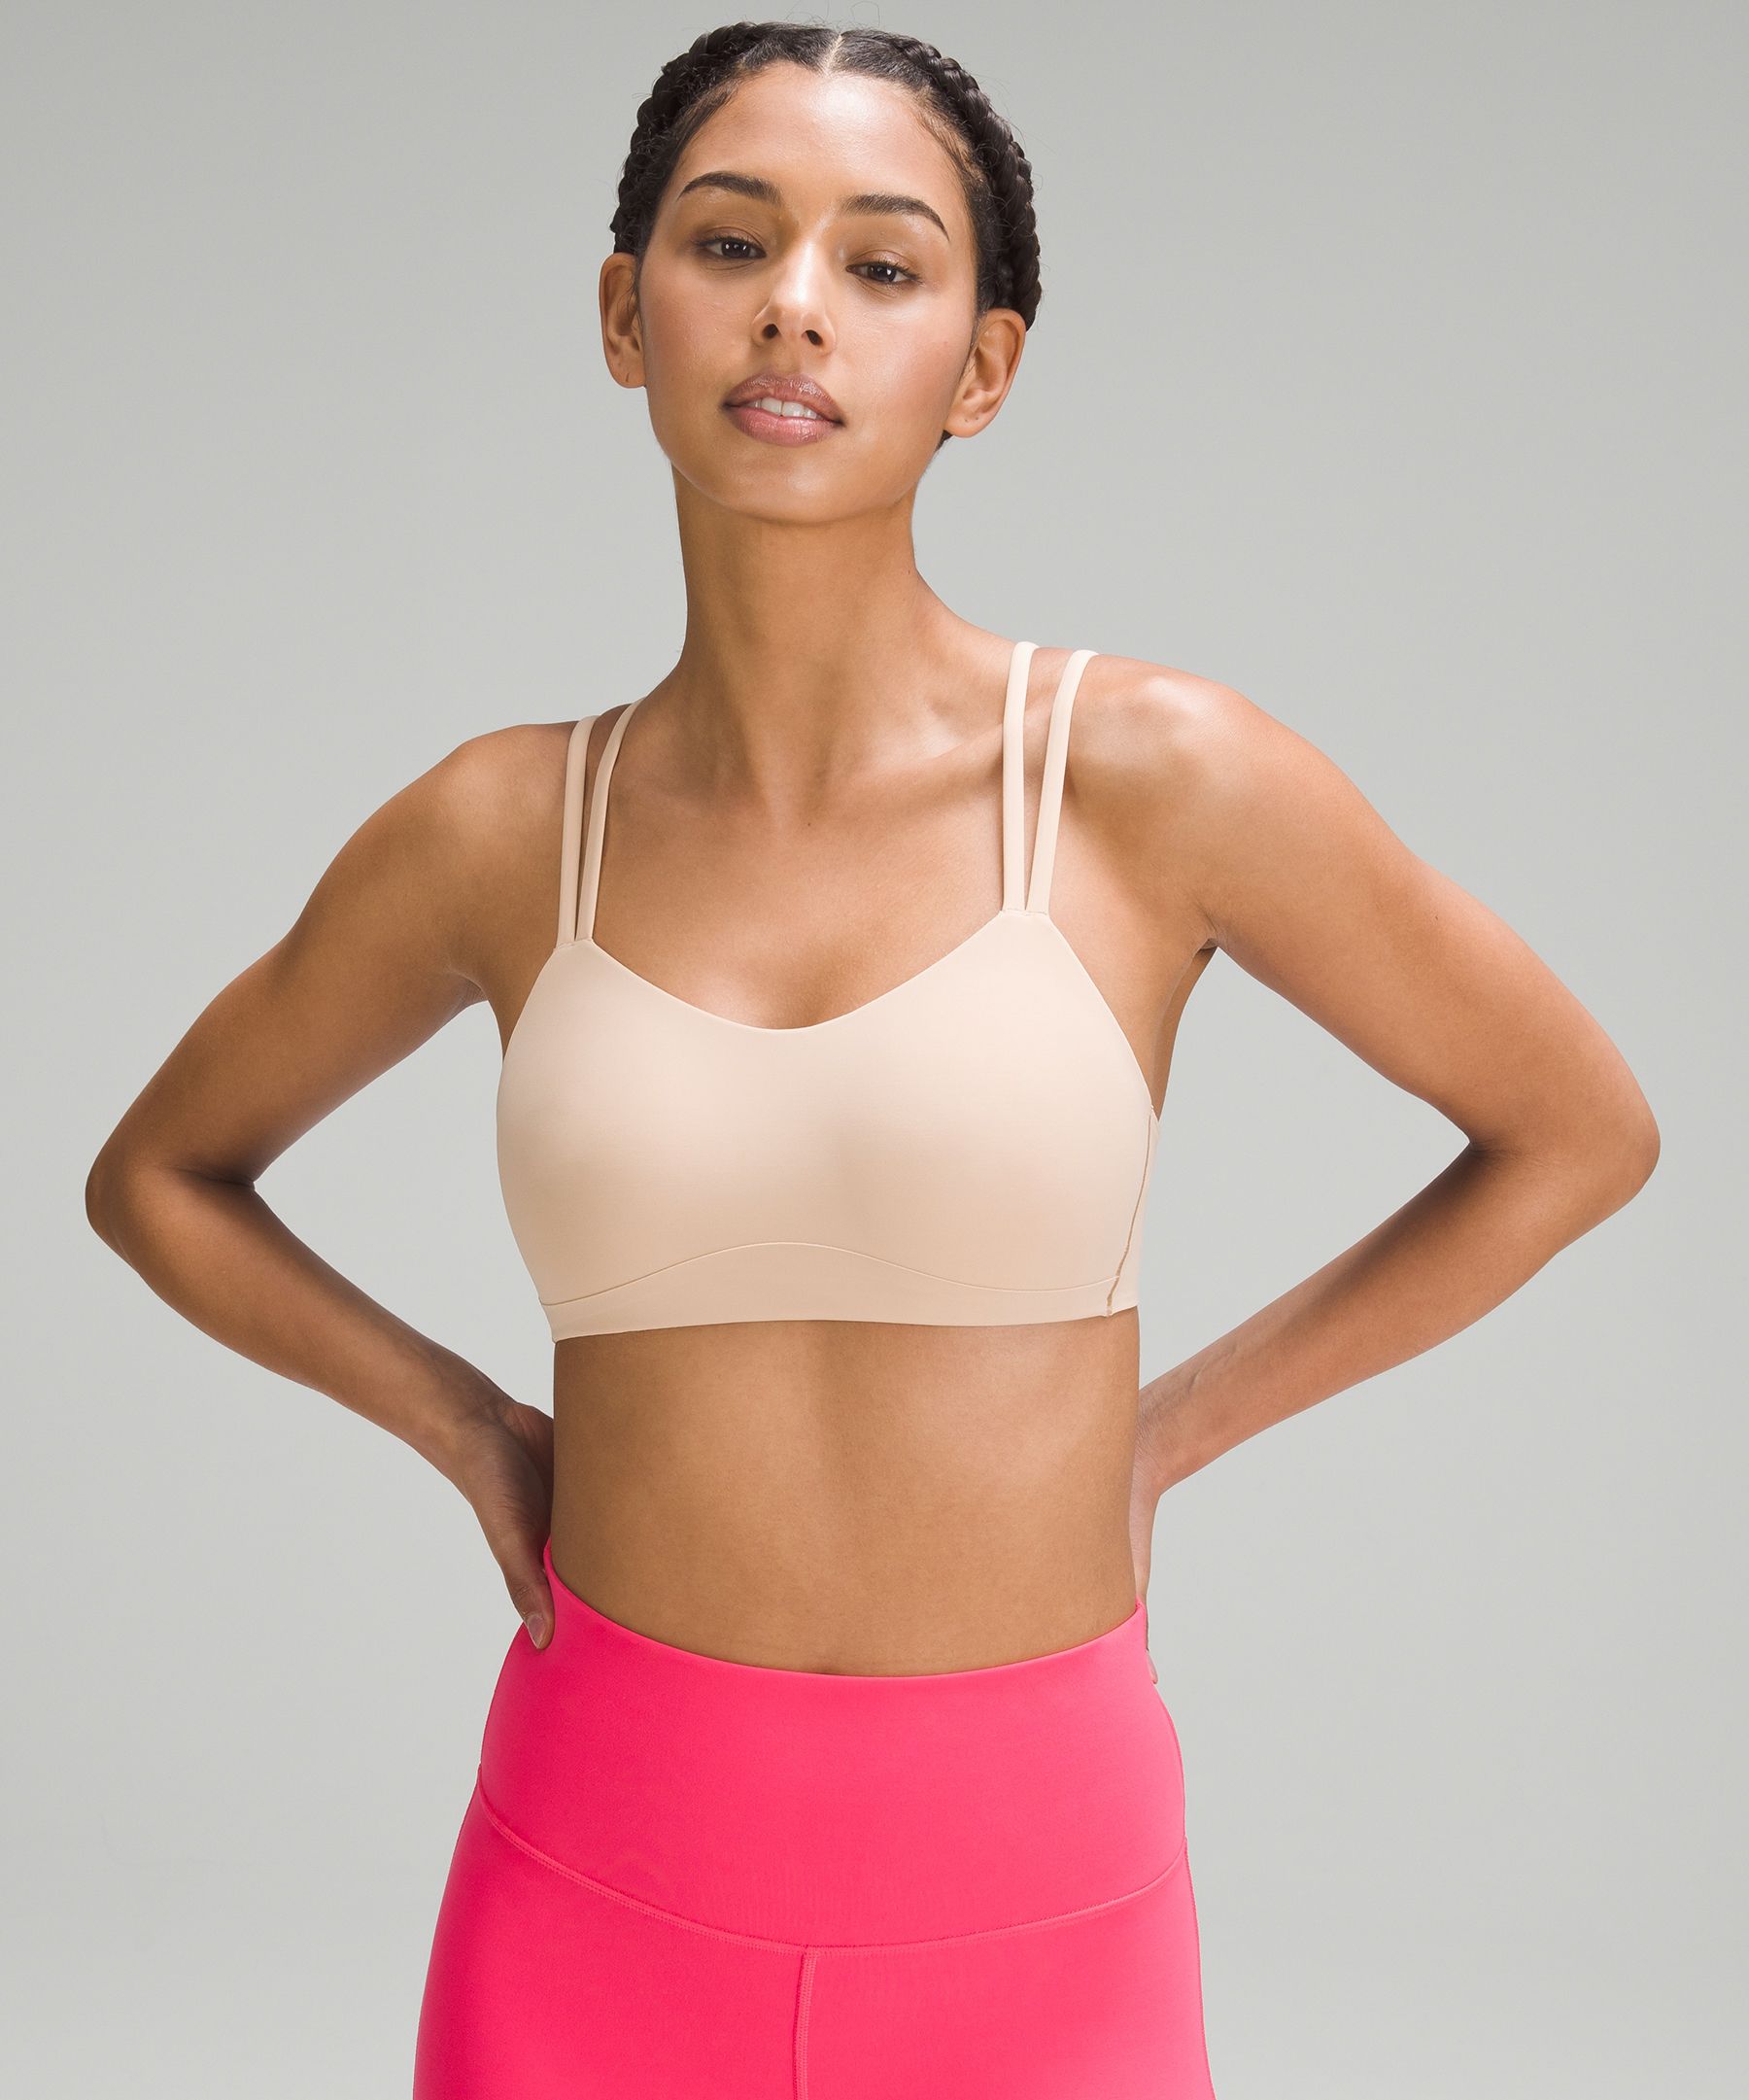 Lululemon Like A Cloud Bra Light Support, B/c Cup In White